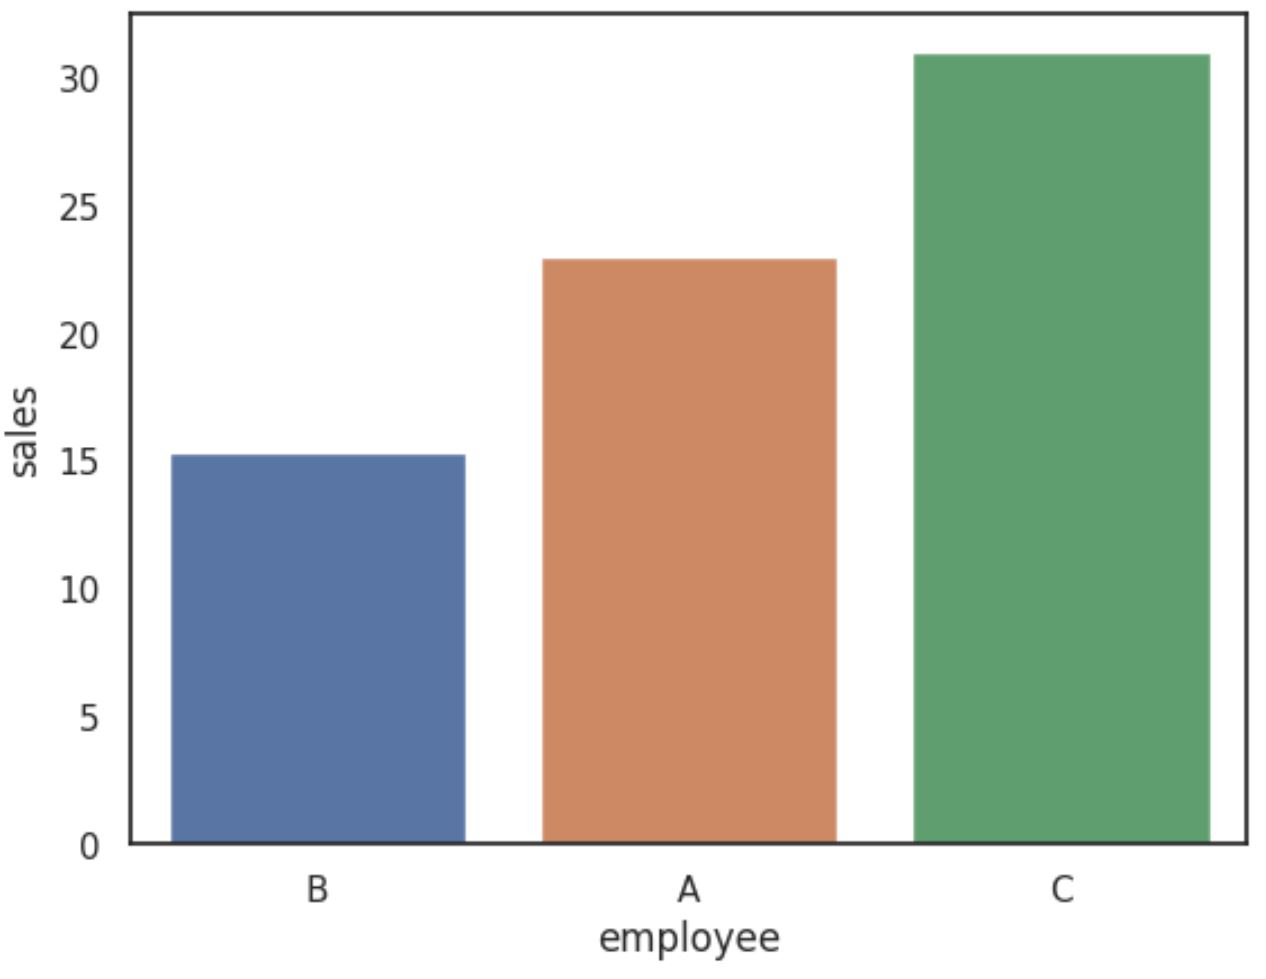 How To Change The Order Of Bars In Seaborn Barplot Online Statistics Library